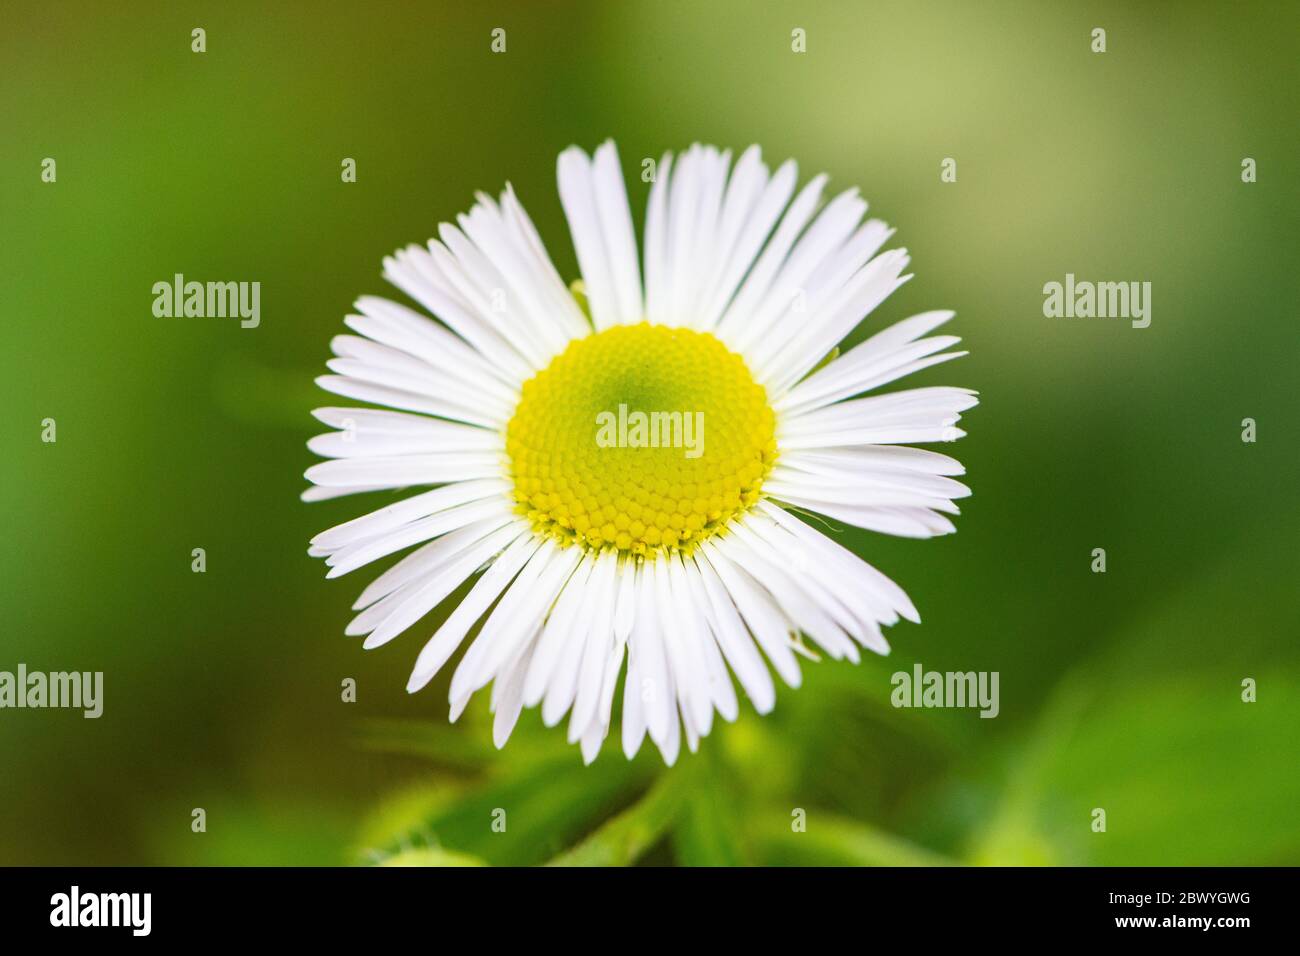 Bellis perennis is a common daisy with thin white petals and yellow pistils, a small wildflower on a green background Stock Photo